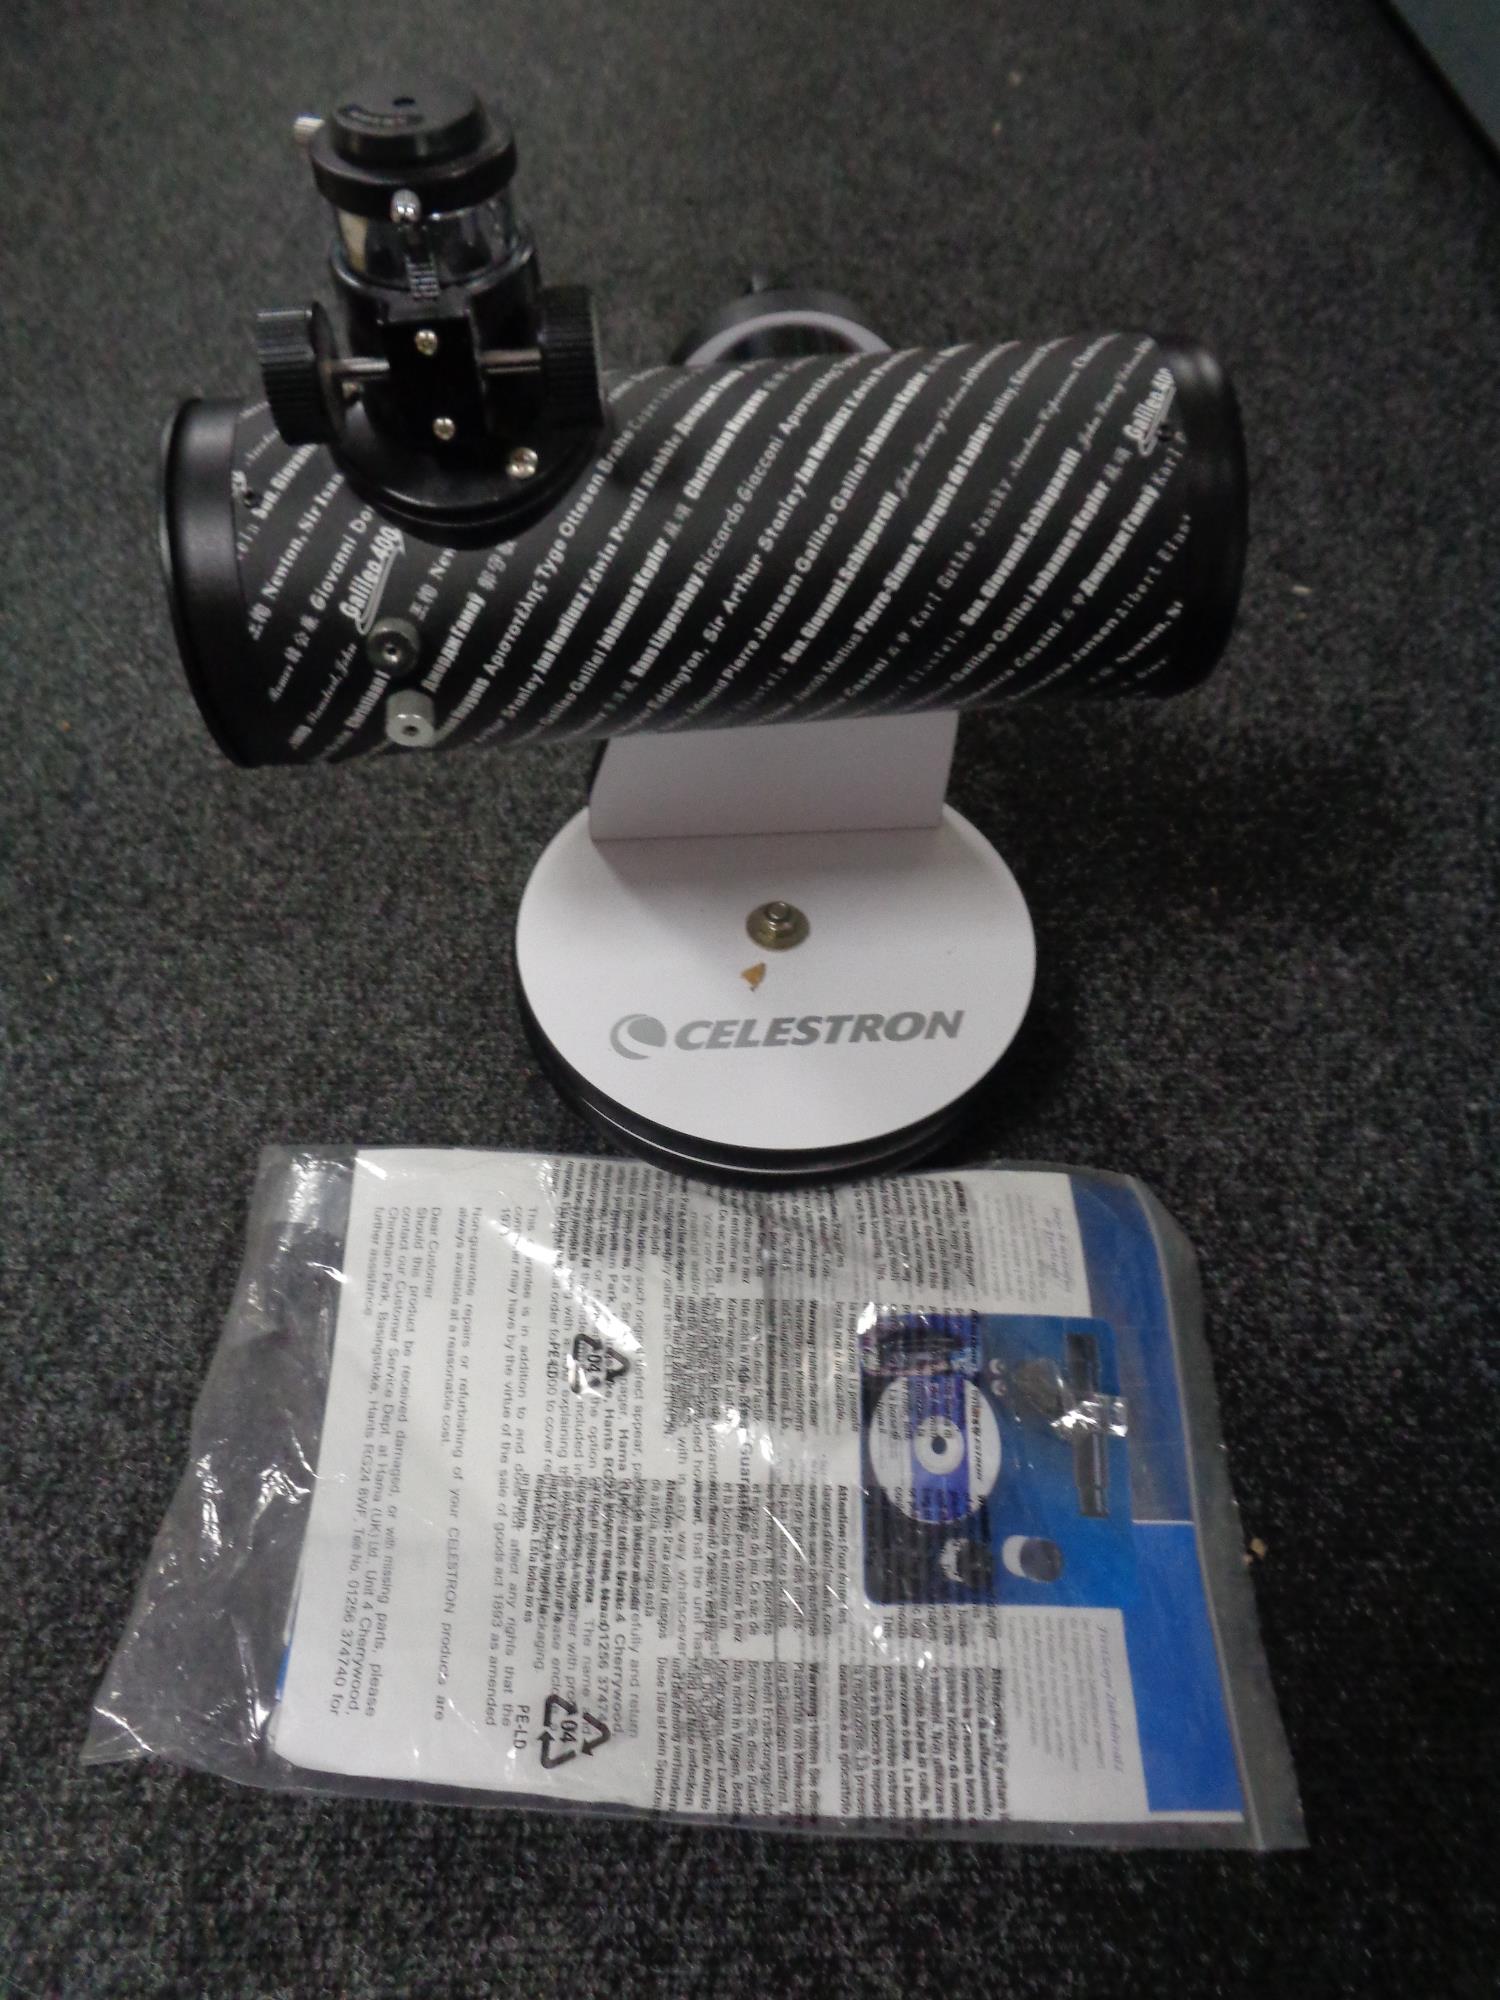 A Celestron 21024 bench top telescope with instructions and interchangeable lens